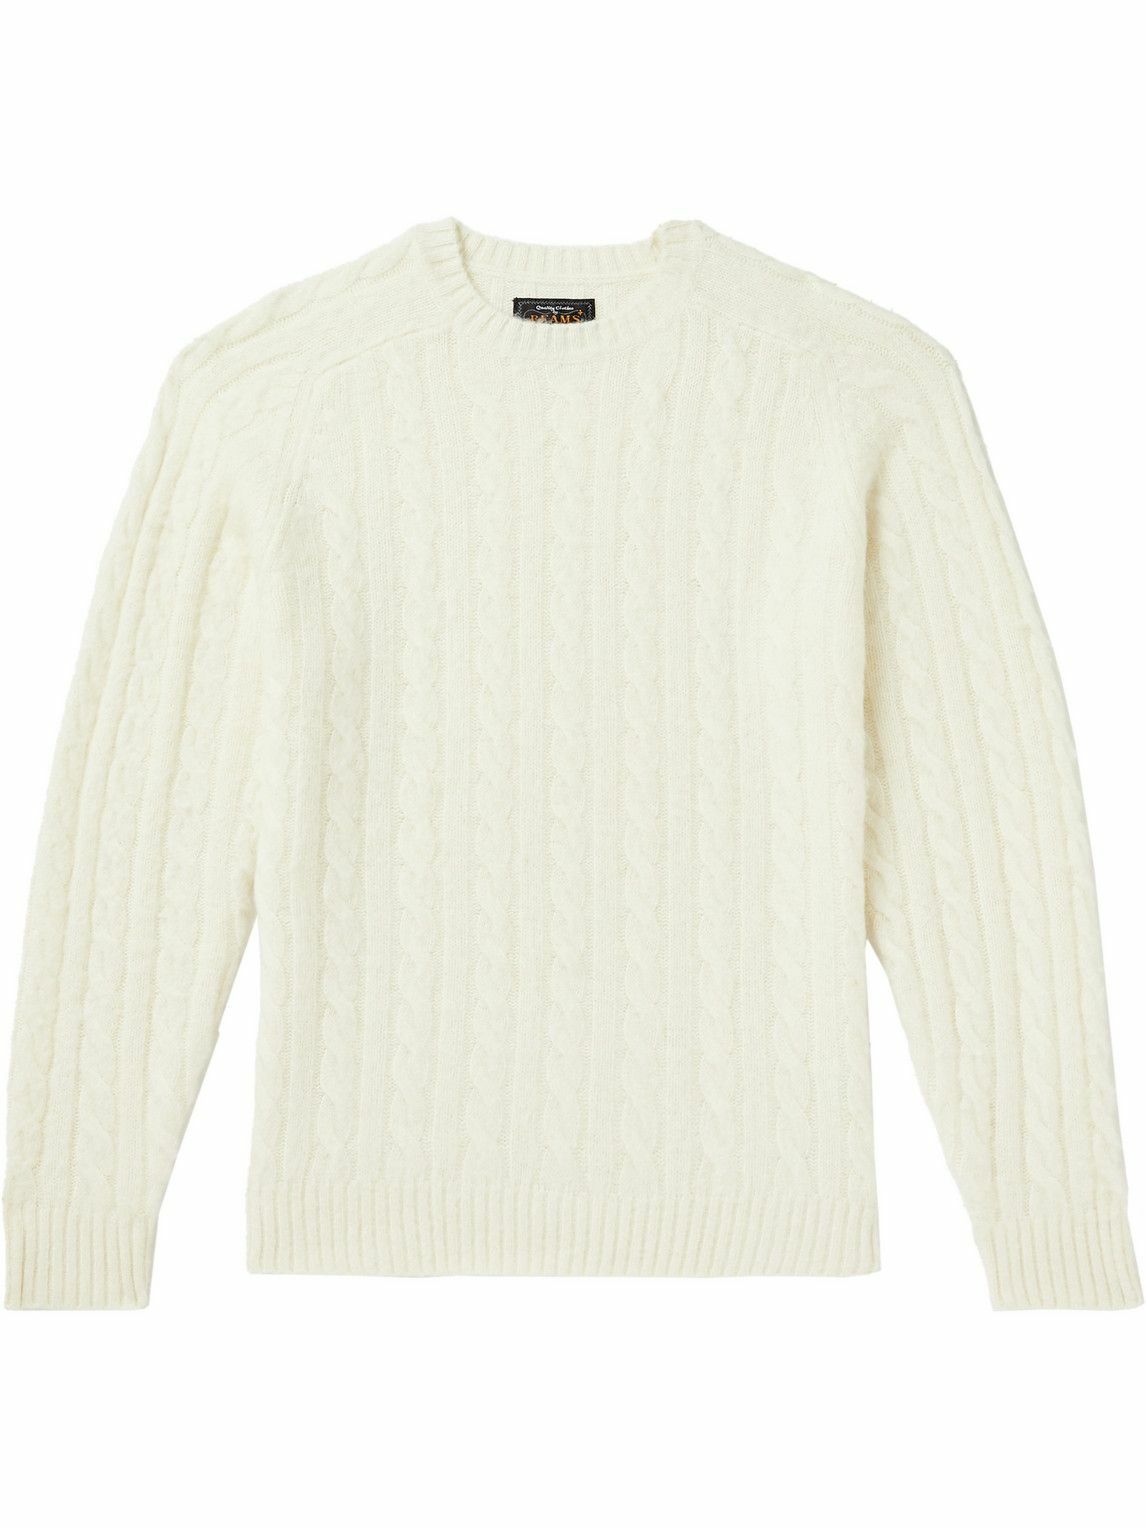 Beams Plus - Cable-Knit Wool-Blend Sweater - Neutrals Beams Plus